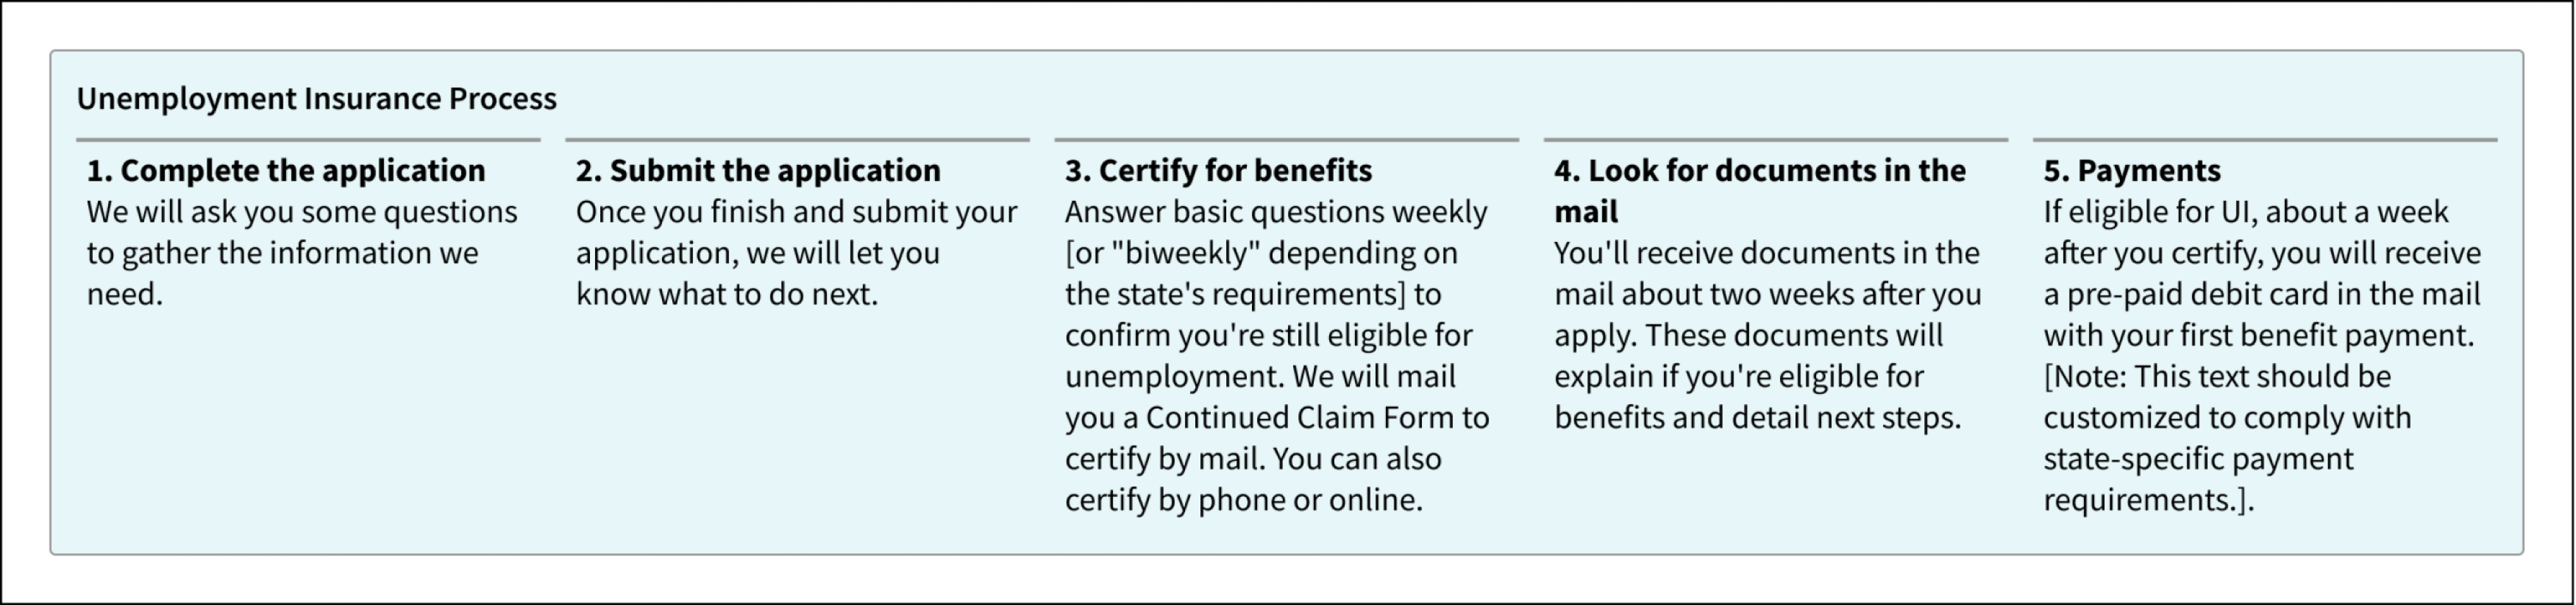 An overview of unemployment insurance broken down into the five main steps of the process.